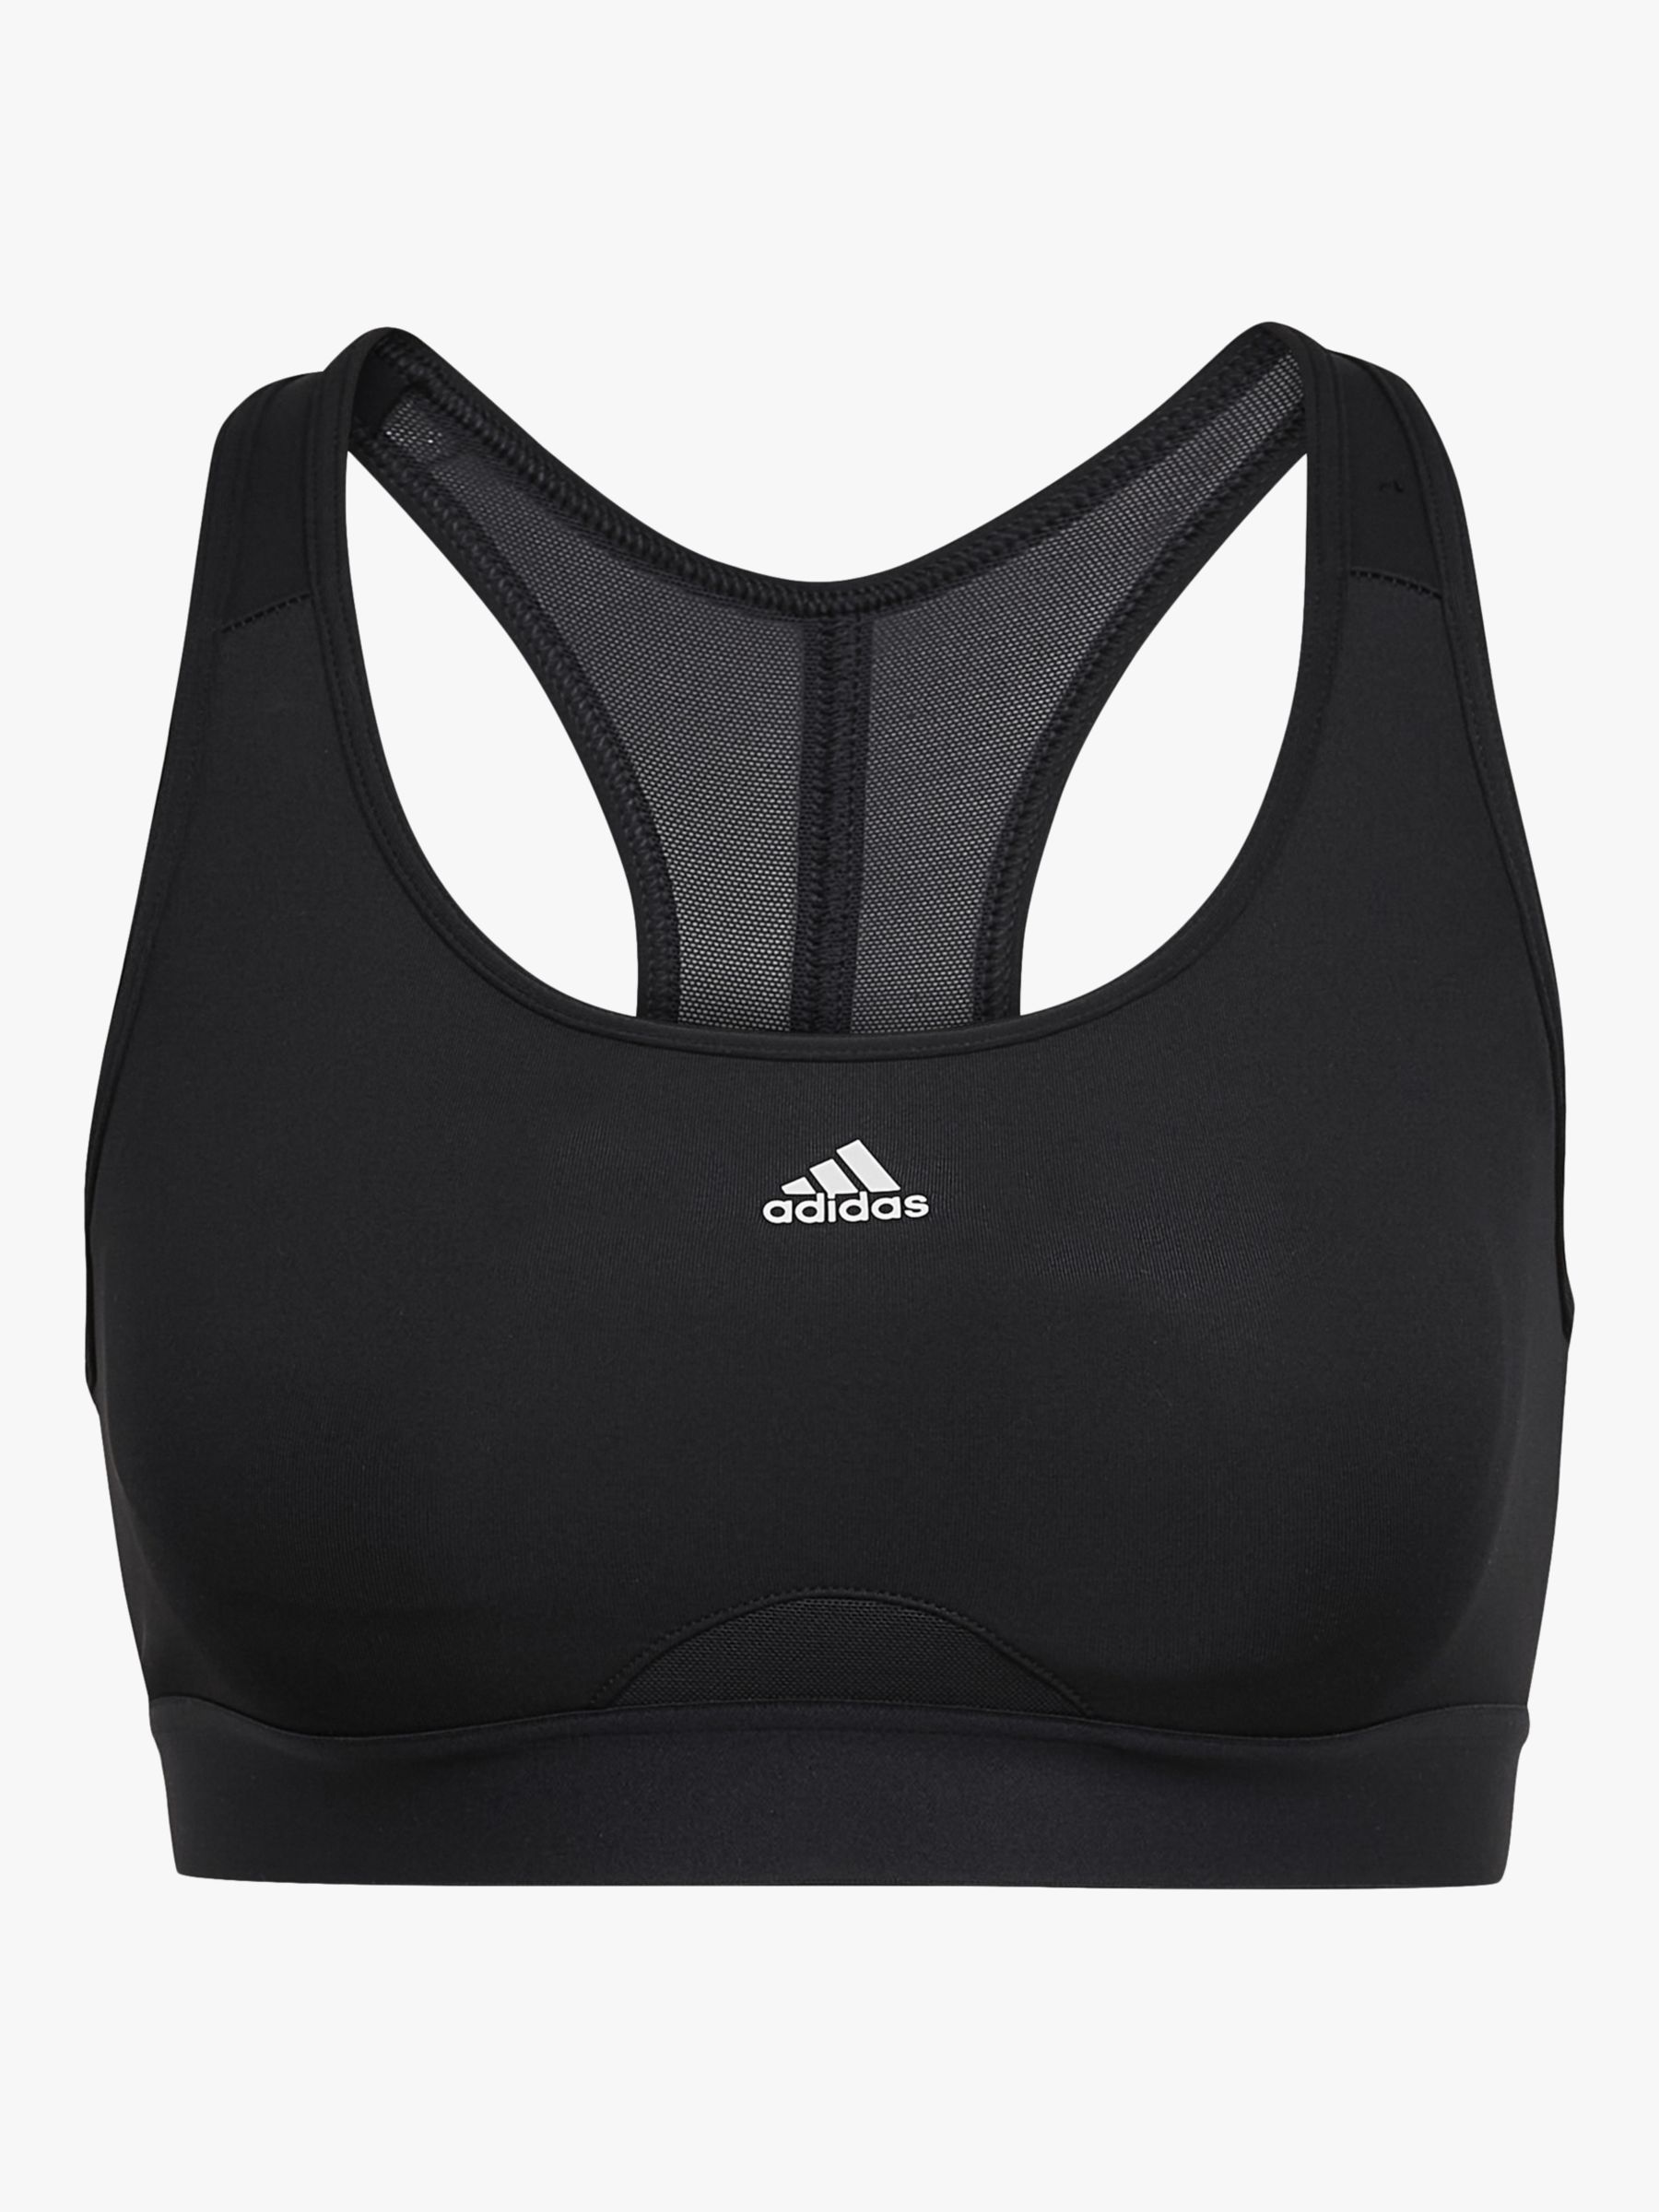 Buy online Black Striped Thermal Sports Bra from lingerie for